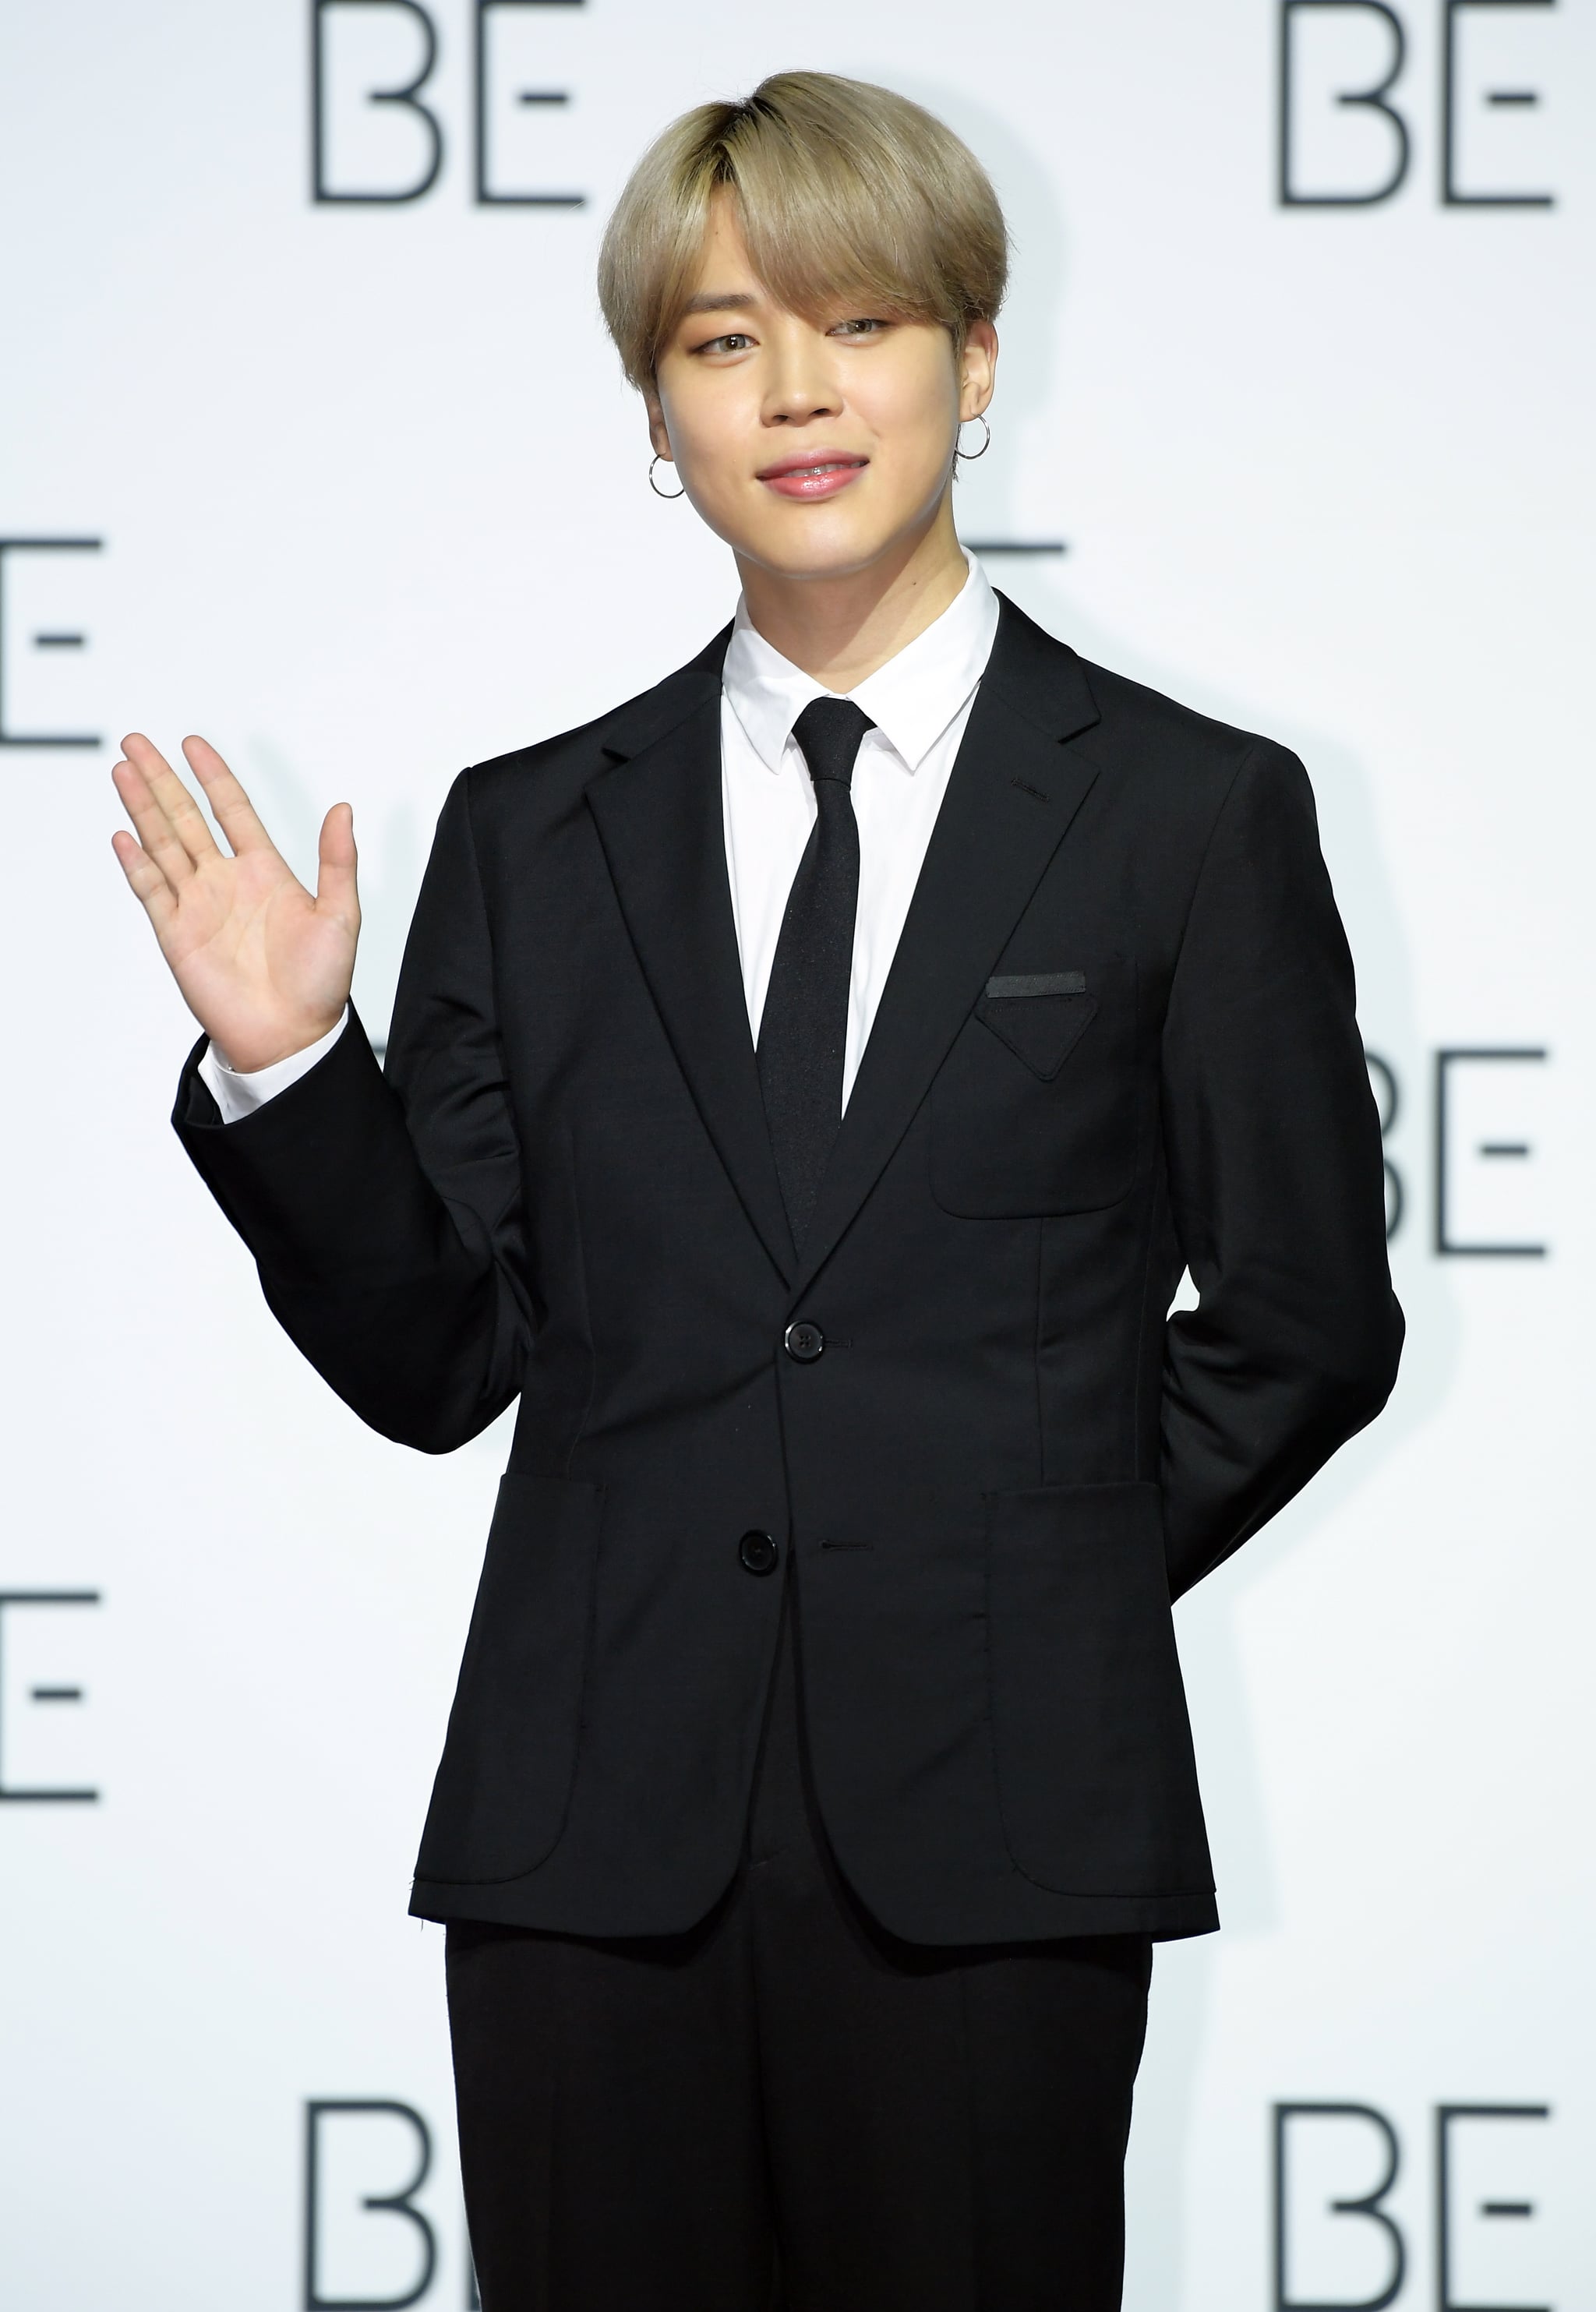 SEOUL, SOUTH KOREA - NOVEMBER 20: Jimin of BTS during BTS's New Album 'BE (Deluxe Edition)' Release Press Conference at Dongdaemun Design Plaza on November 20, 2020 in Seoul, South Korea. (Photo by The Chosunilbo JNS/Imazins via Getty Images)